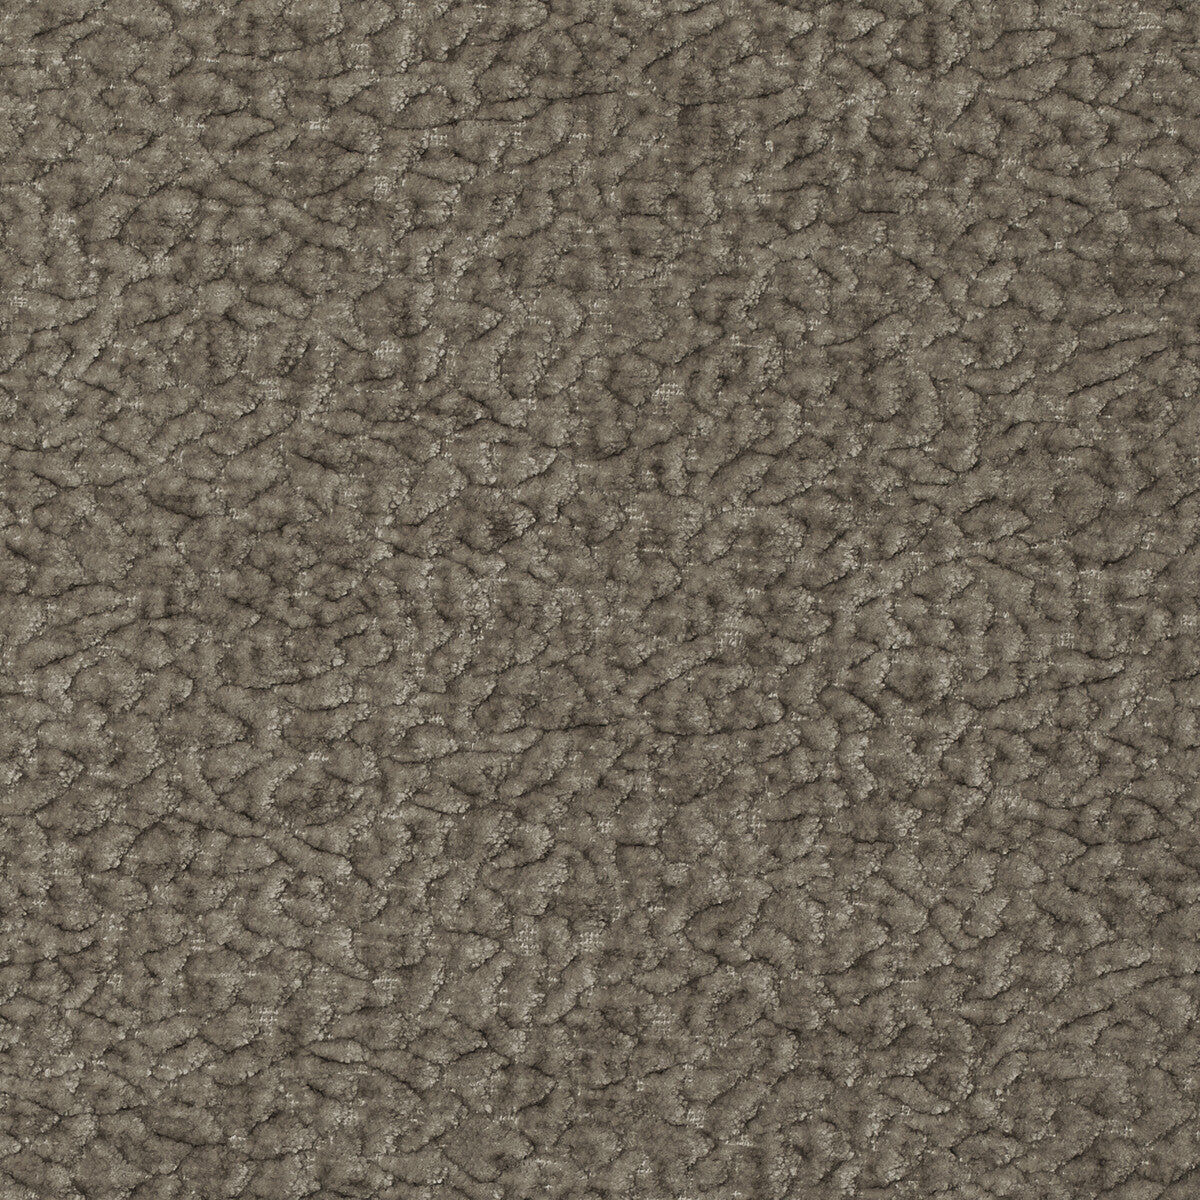 Barton Chenille fabric in mouse color - pattern 36074.606.0 - by Kravet Smart